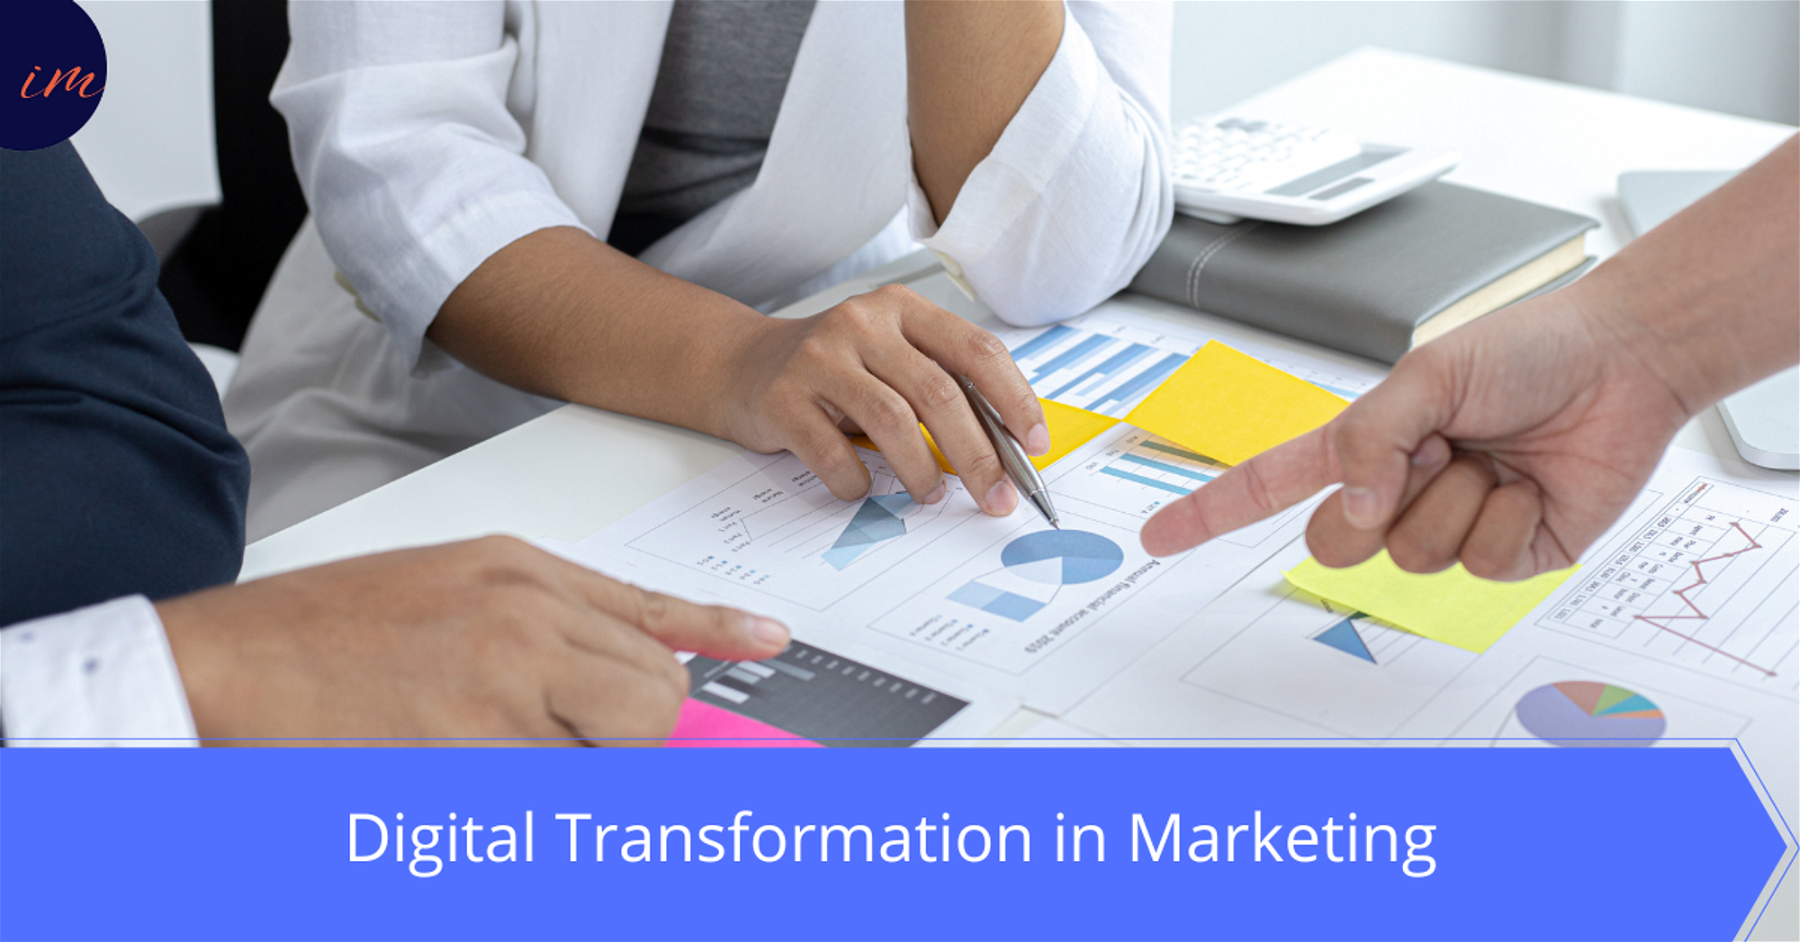 What Digital Transformation in Marketing Means for Brands